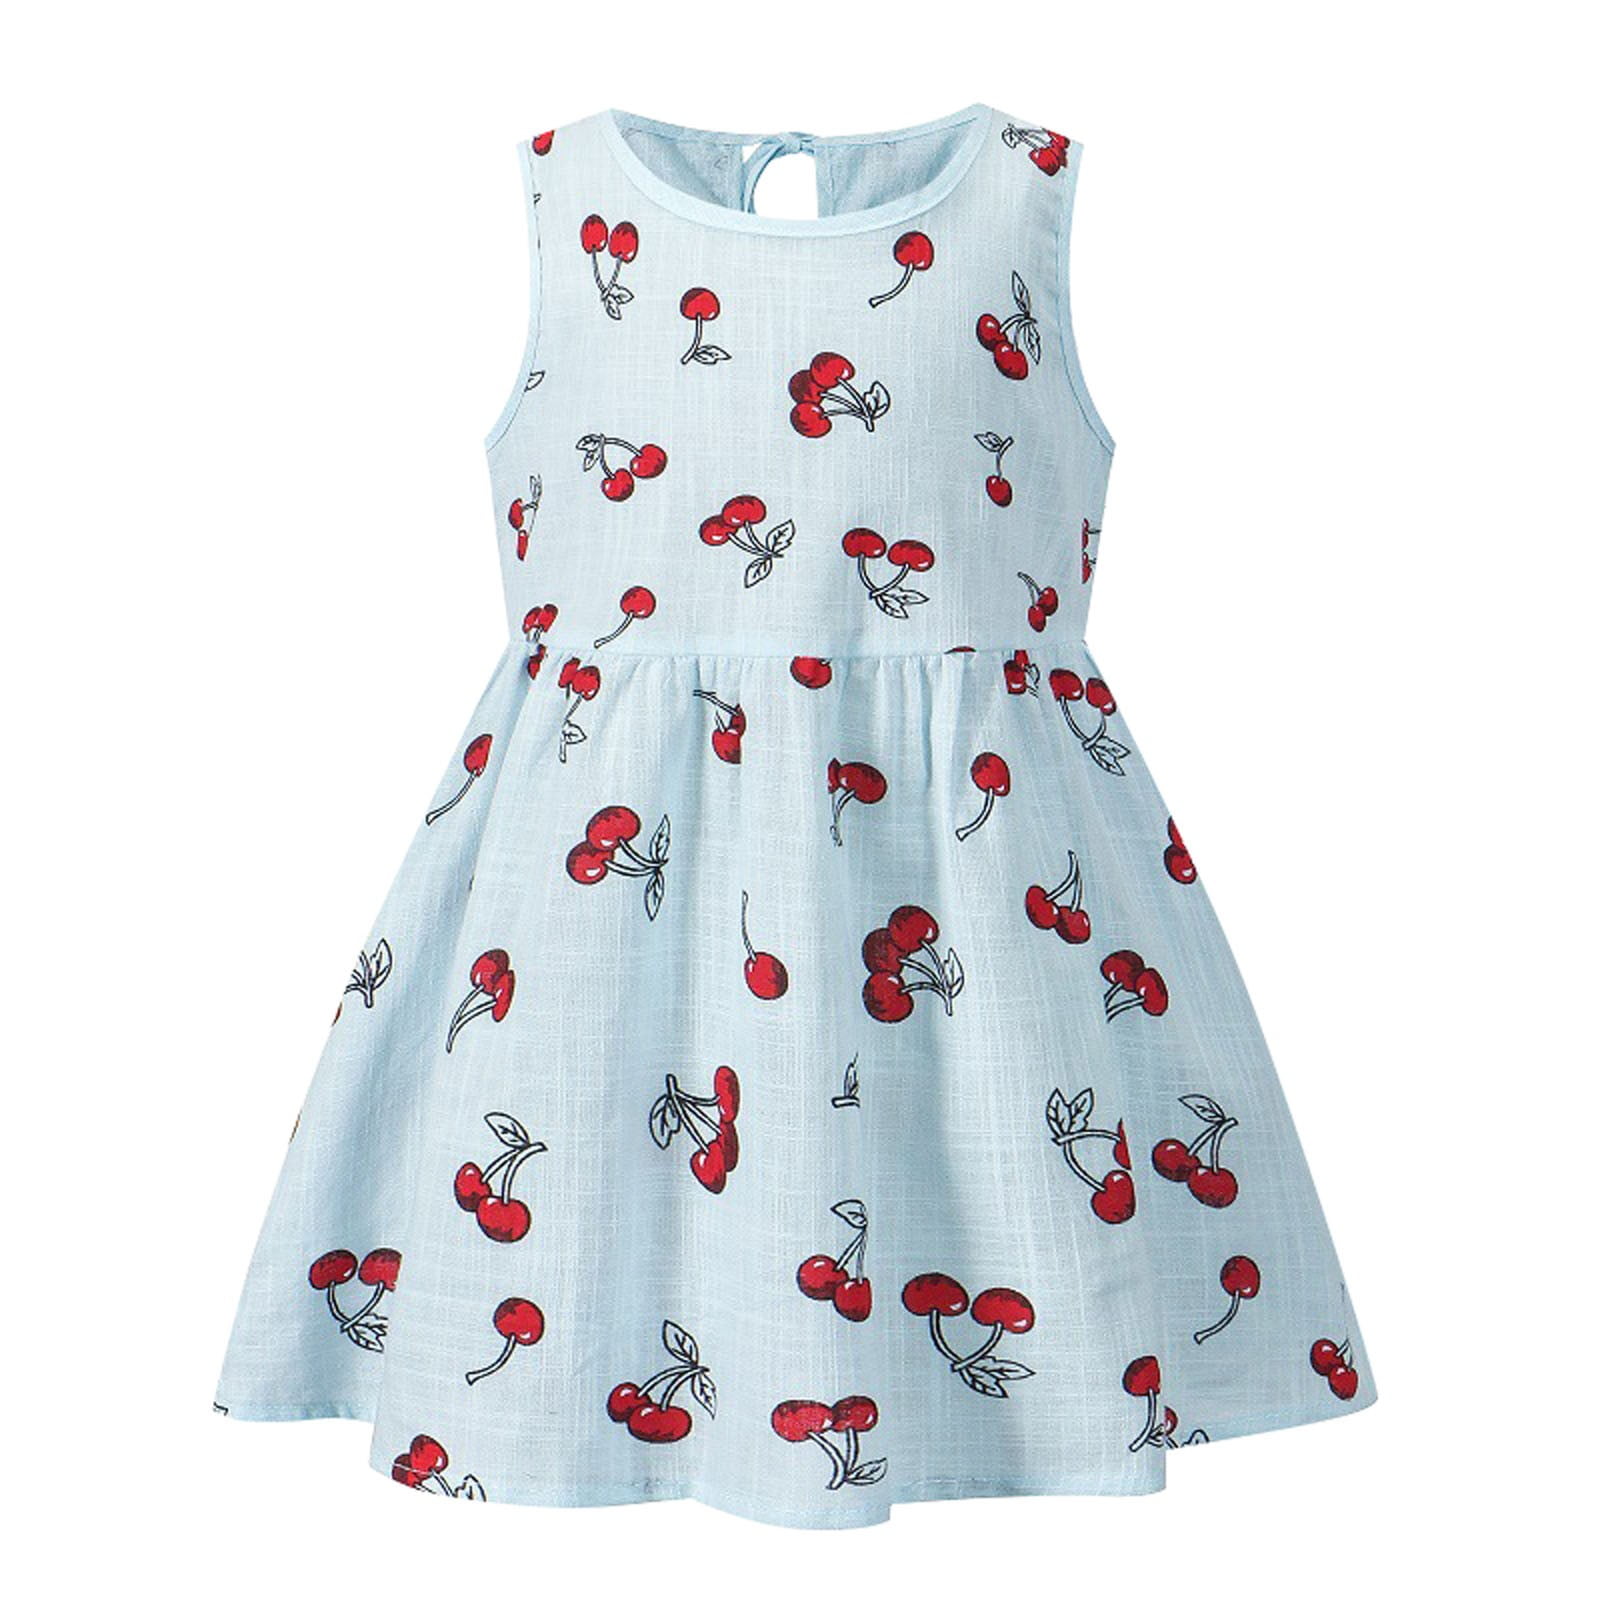 Summer Cotton Princess Dress For Girls Casual, Cute, And Fashionable  Clothing For Students, 11 Year Old Girls, With Pocket Solid Color For Daily  Wear And Parties From Blumin, $10.37 | DHgate.Com